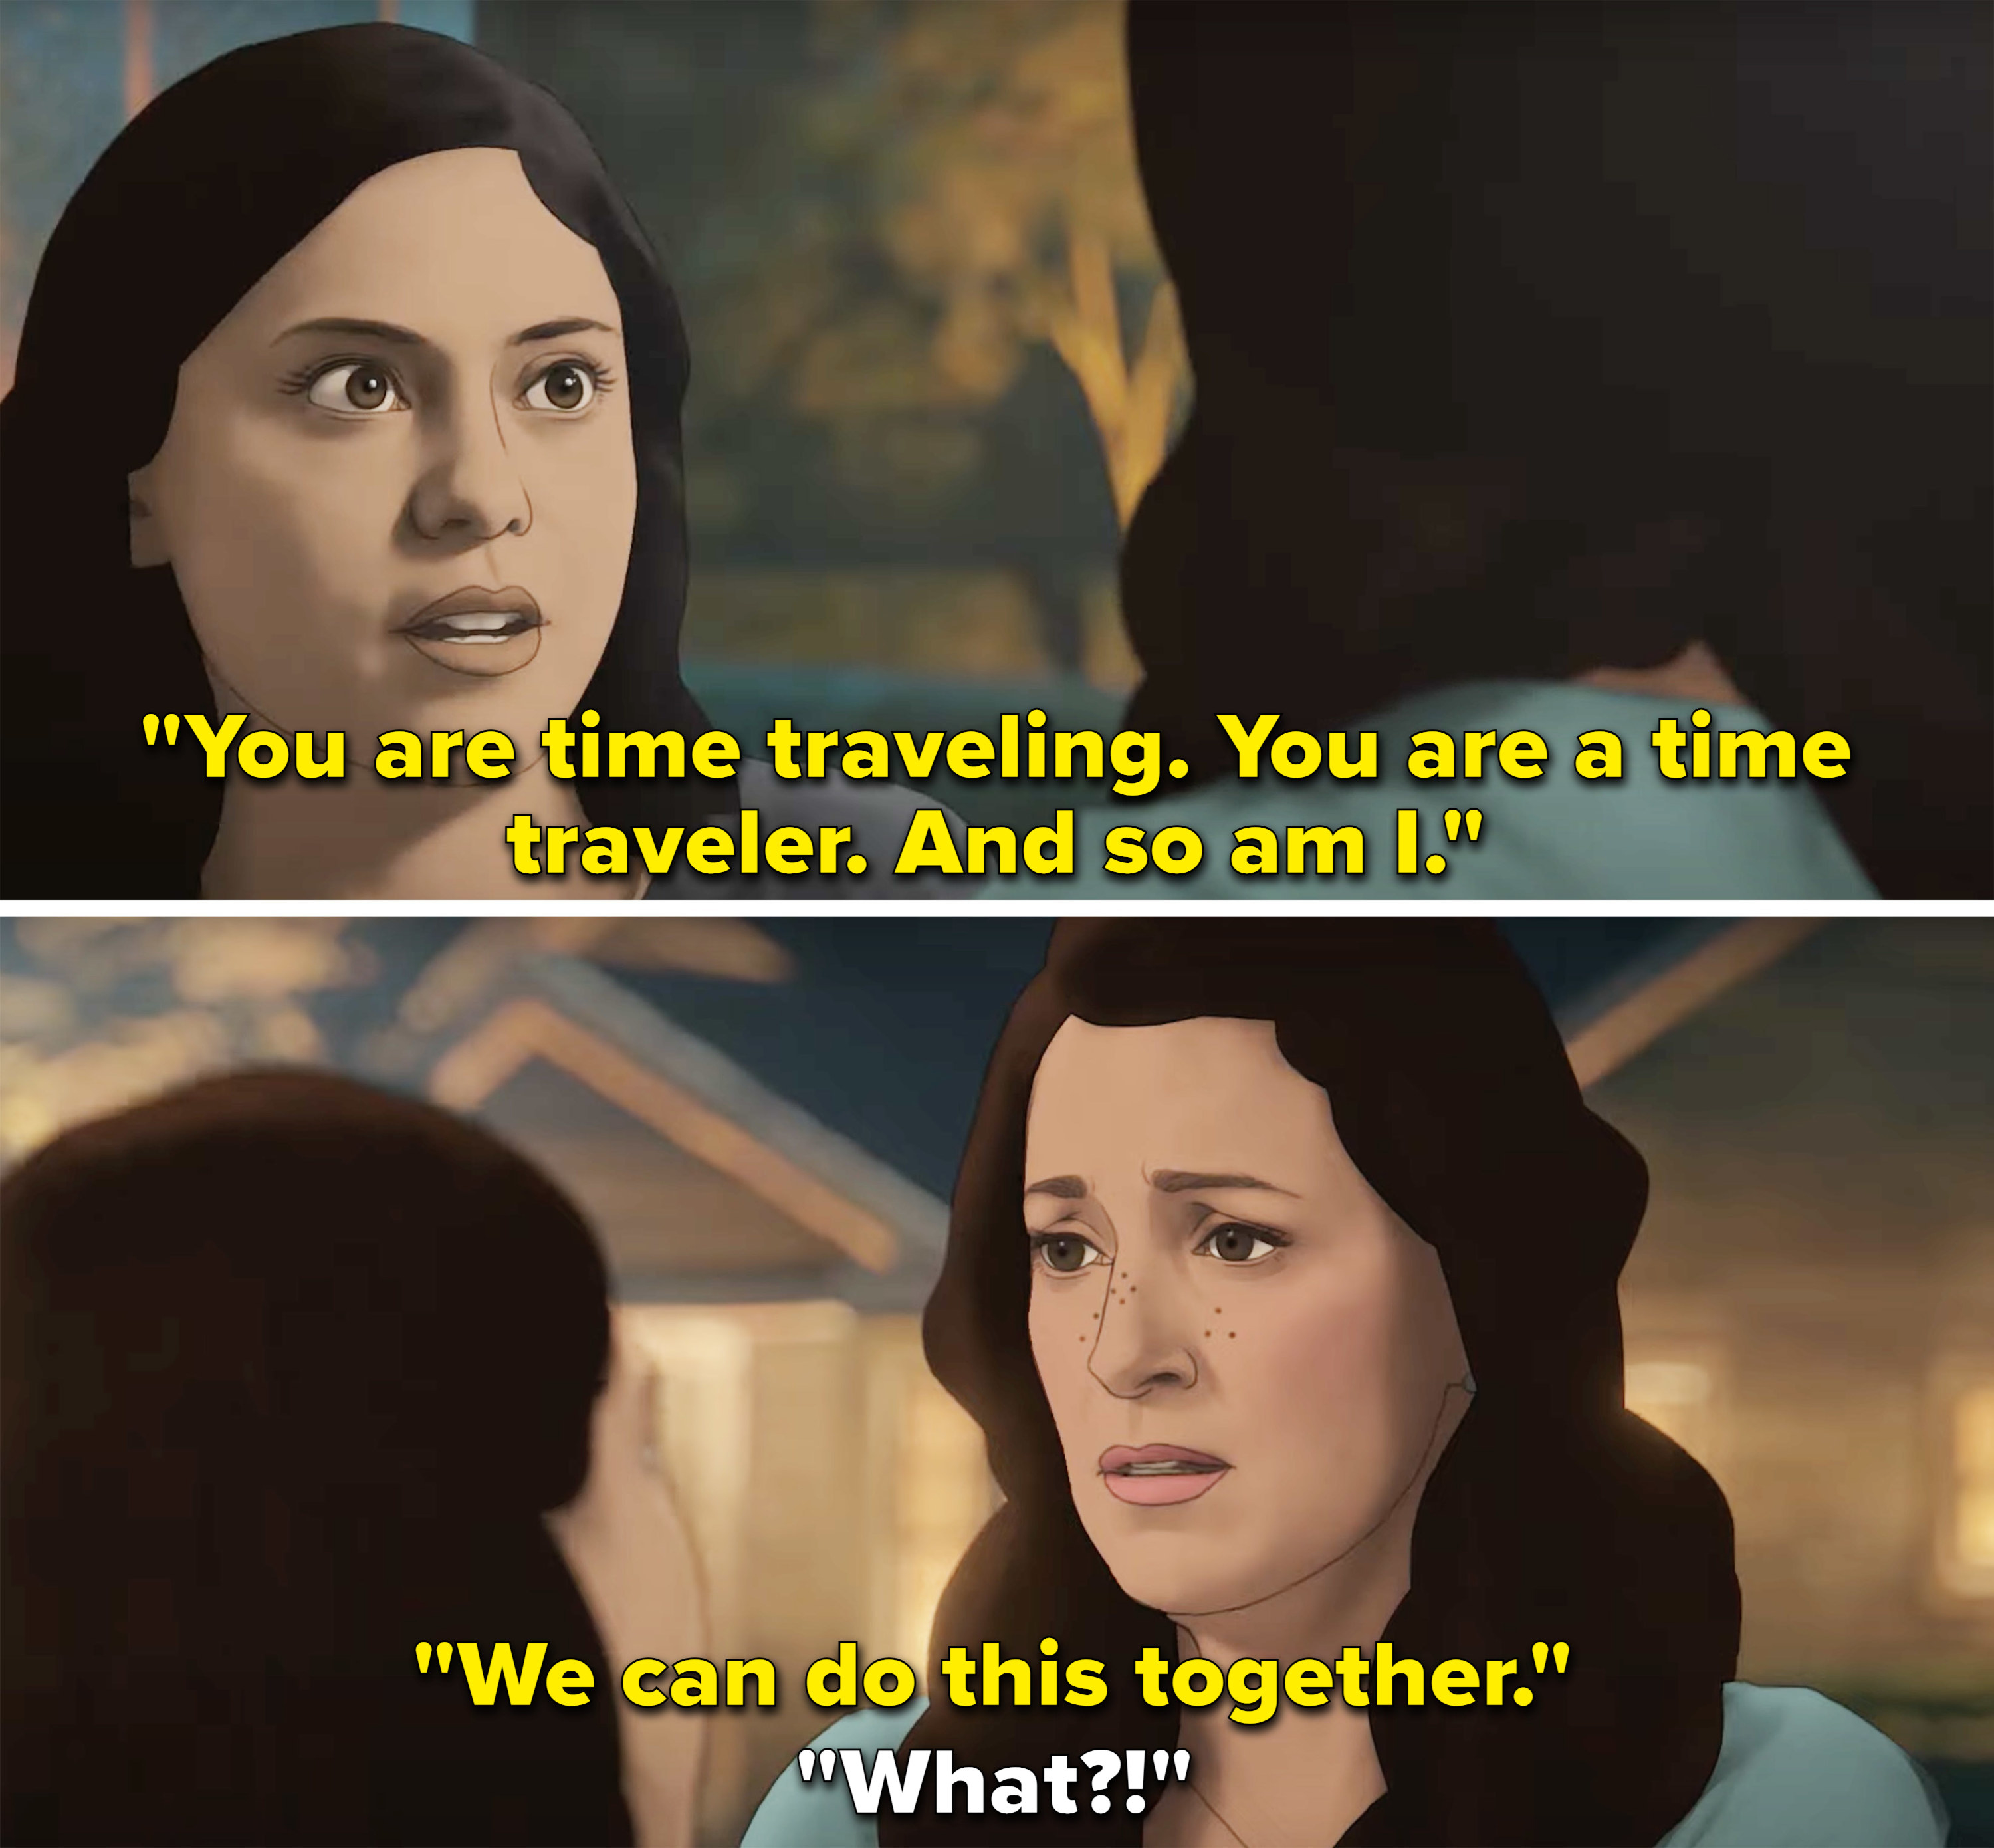 Alma explaining to Becca that they are both time travelers